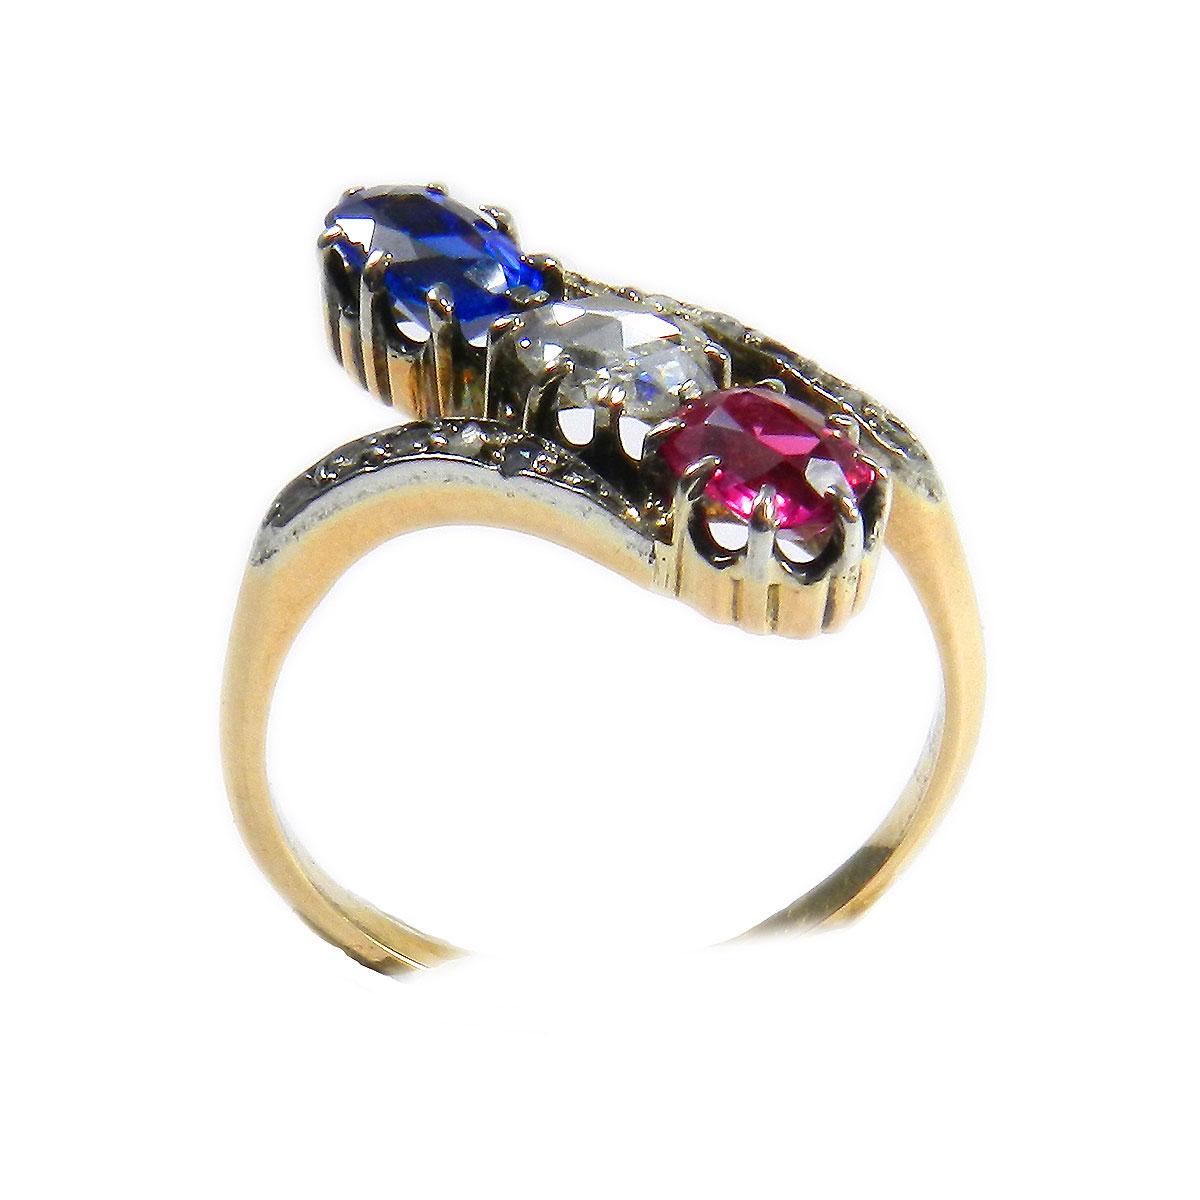 Antique 0.25 Carat Diamond Ruby ​​and Sapphire Three Stone Gold Ring, circa 1890

Late Victorian vertical three stone ring set with an oval cut diamond of 0.25 ct, accompanied, side by side, by an oval cut sapphire 0.59 ct and a ruby ​​0.47 ct, both